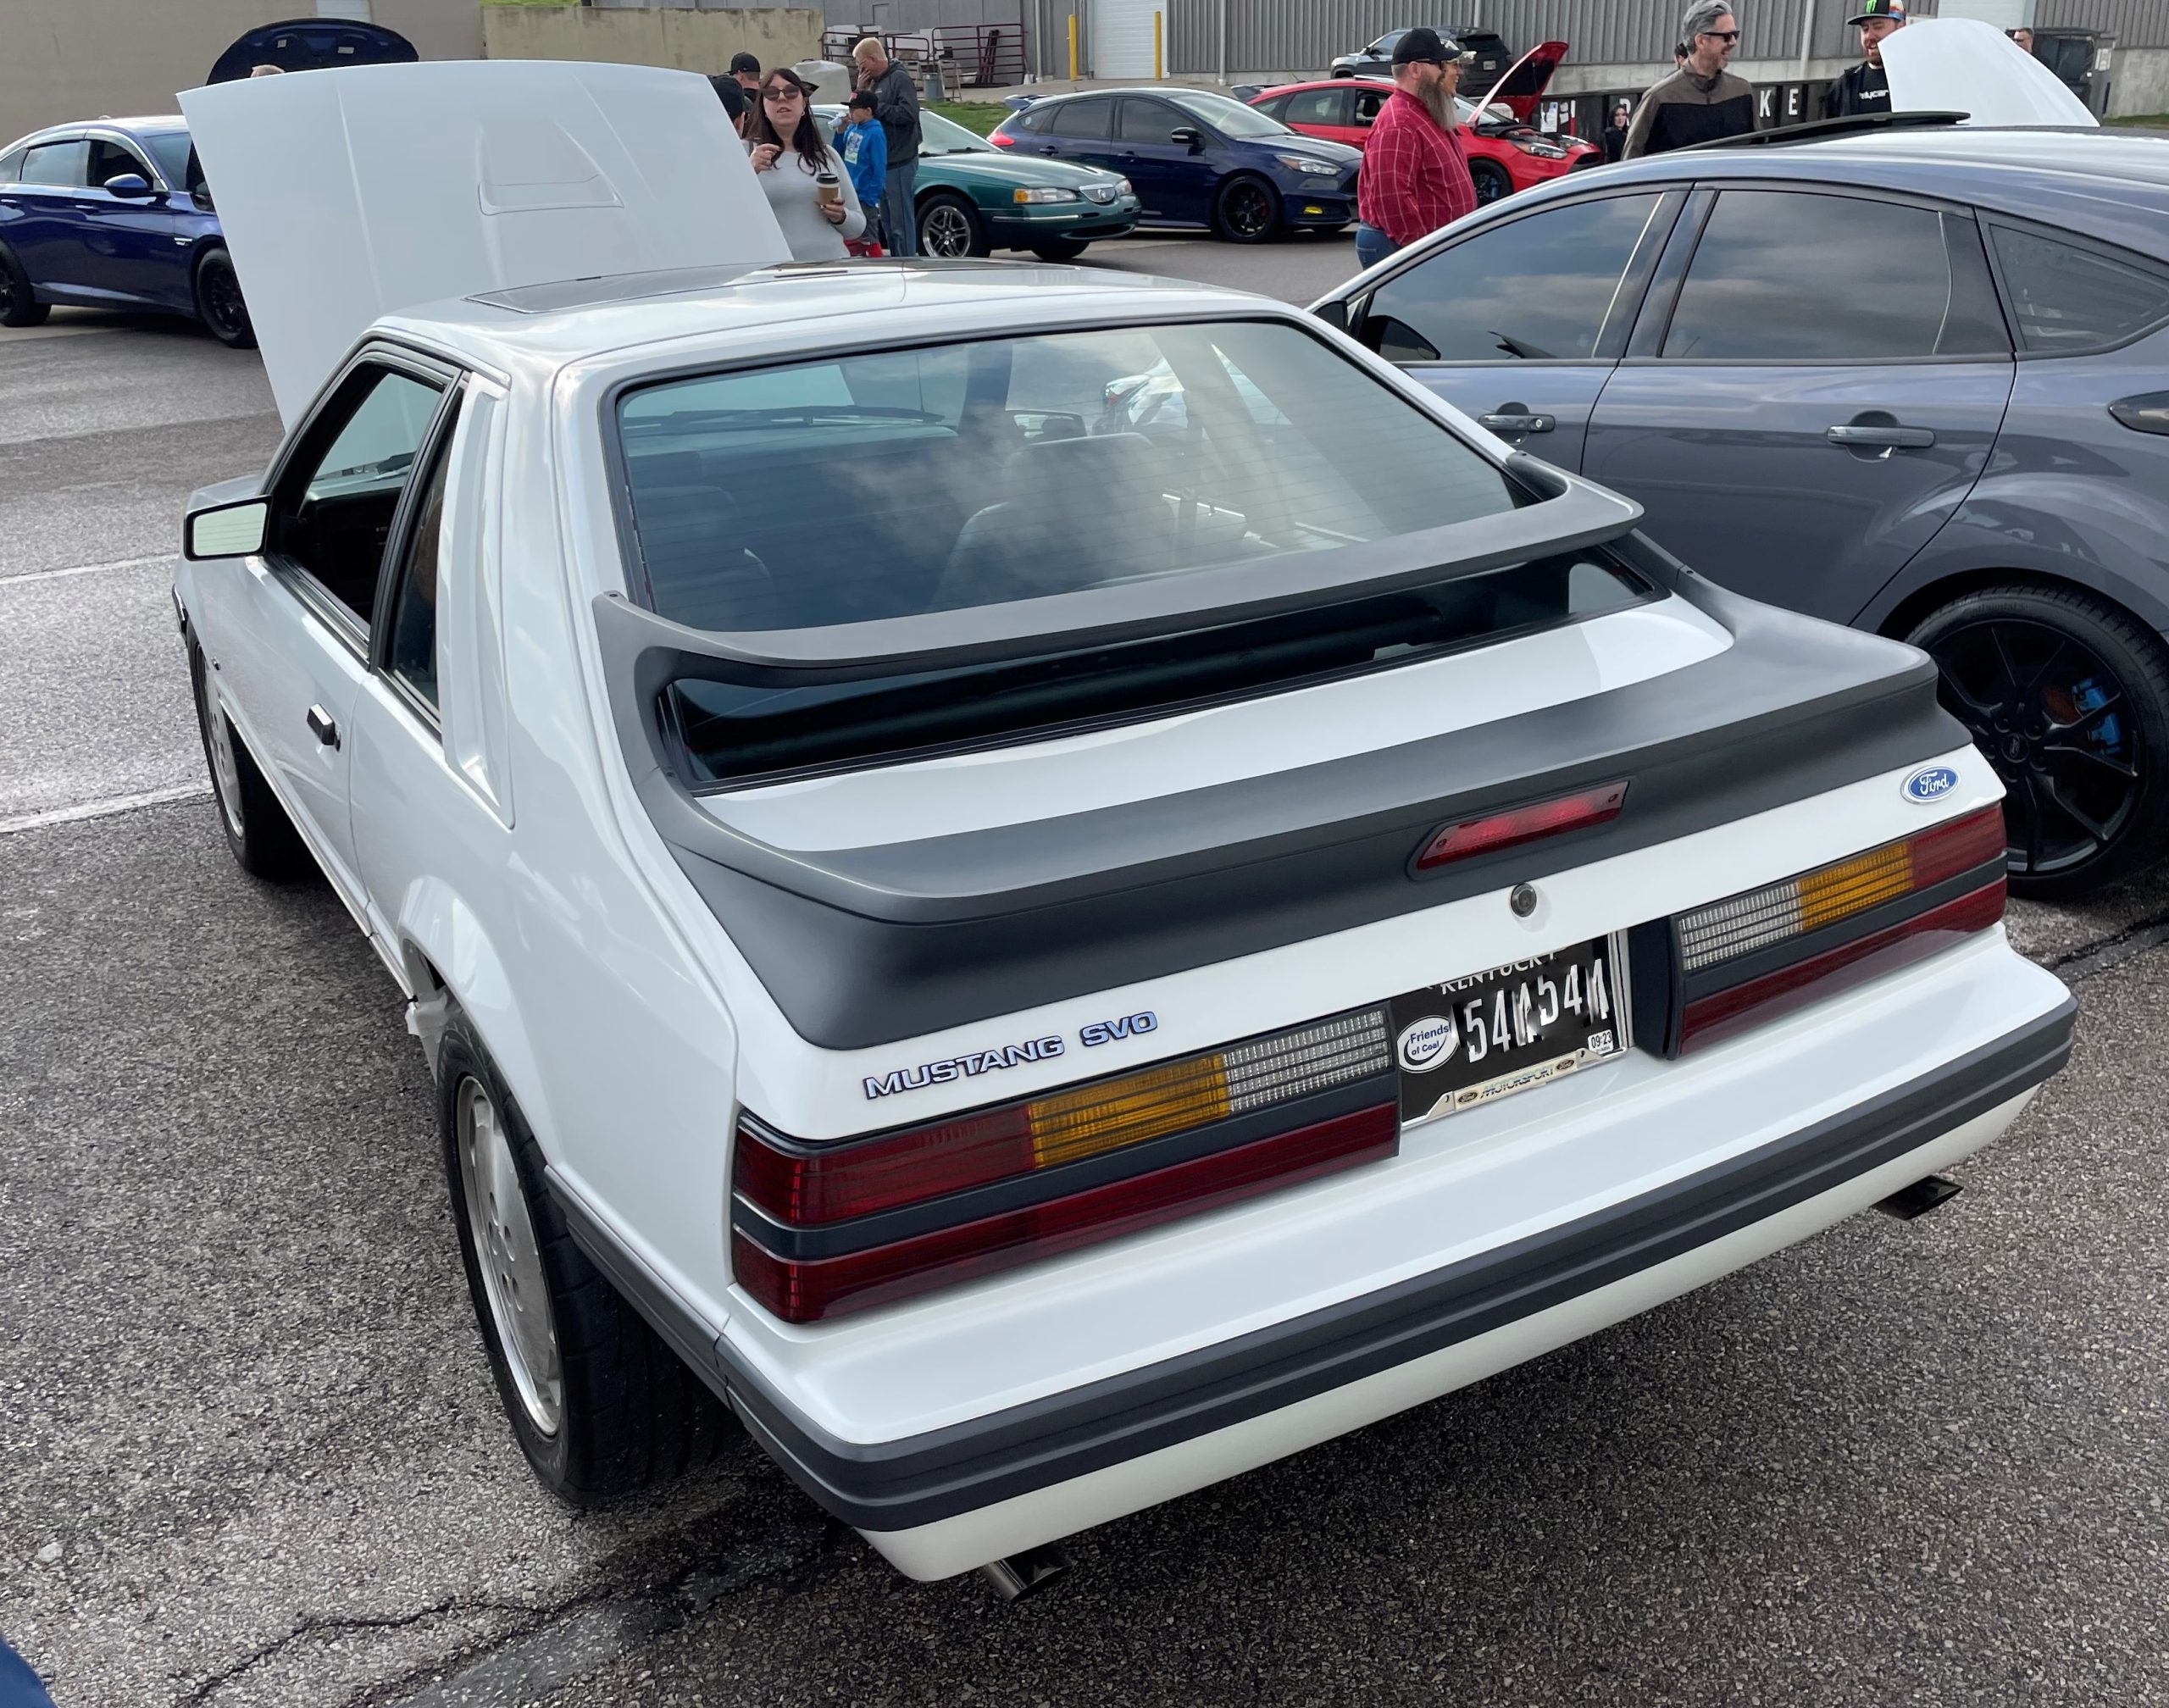 https://www.onallcylinders.com/wp-content/uploads/2021/05/26/rear-spoiler-biplane-on-a-ford-turbo-mustang-foxbody-scaled.jpg